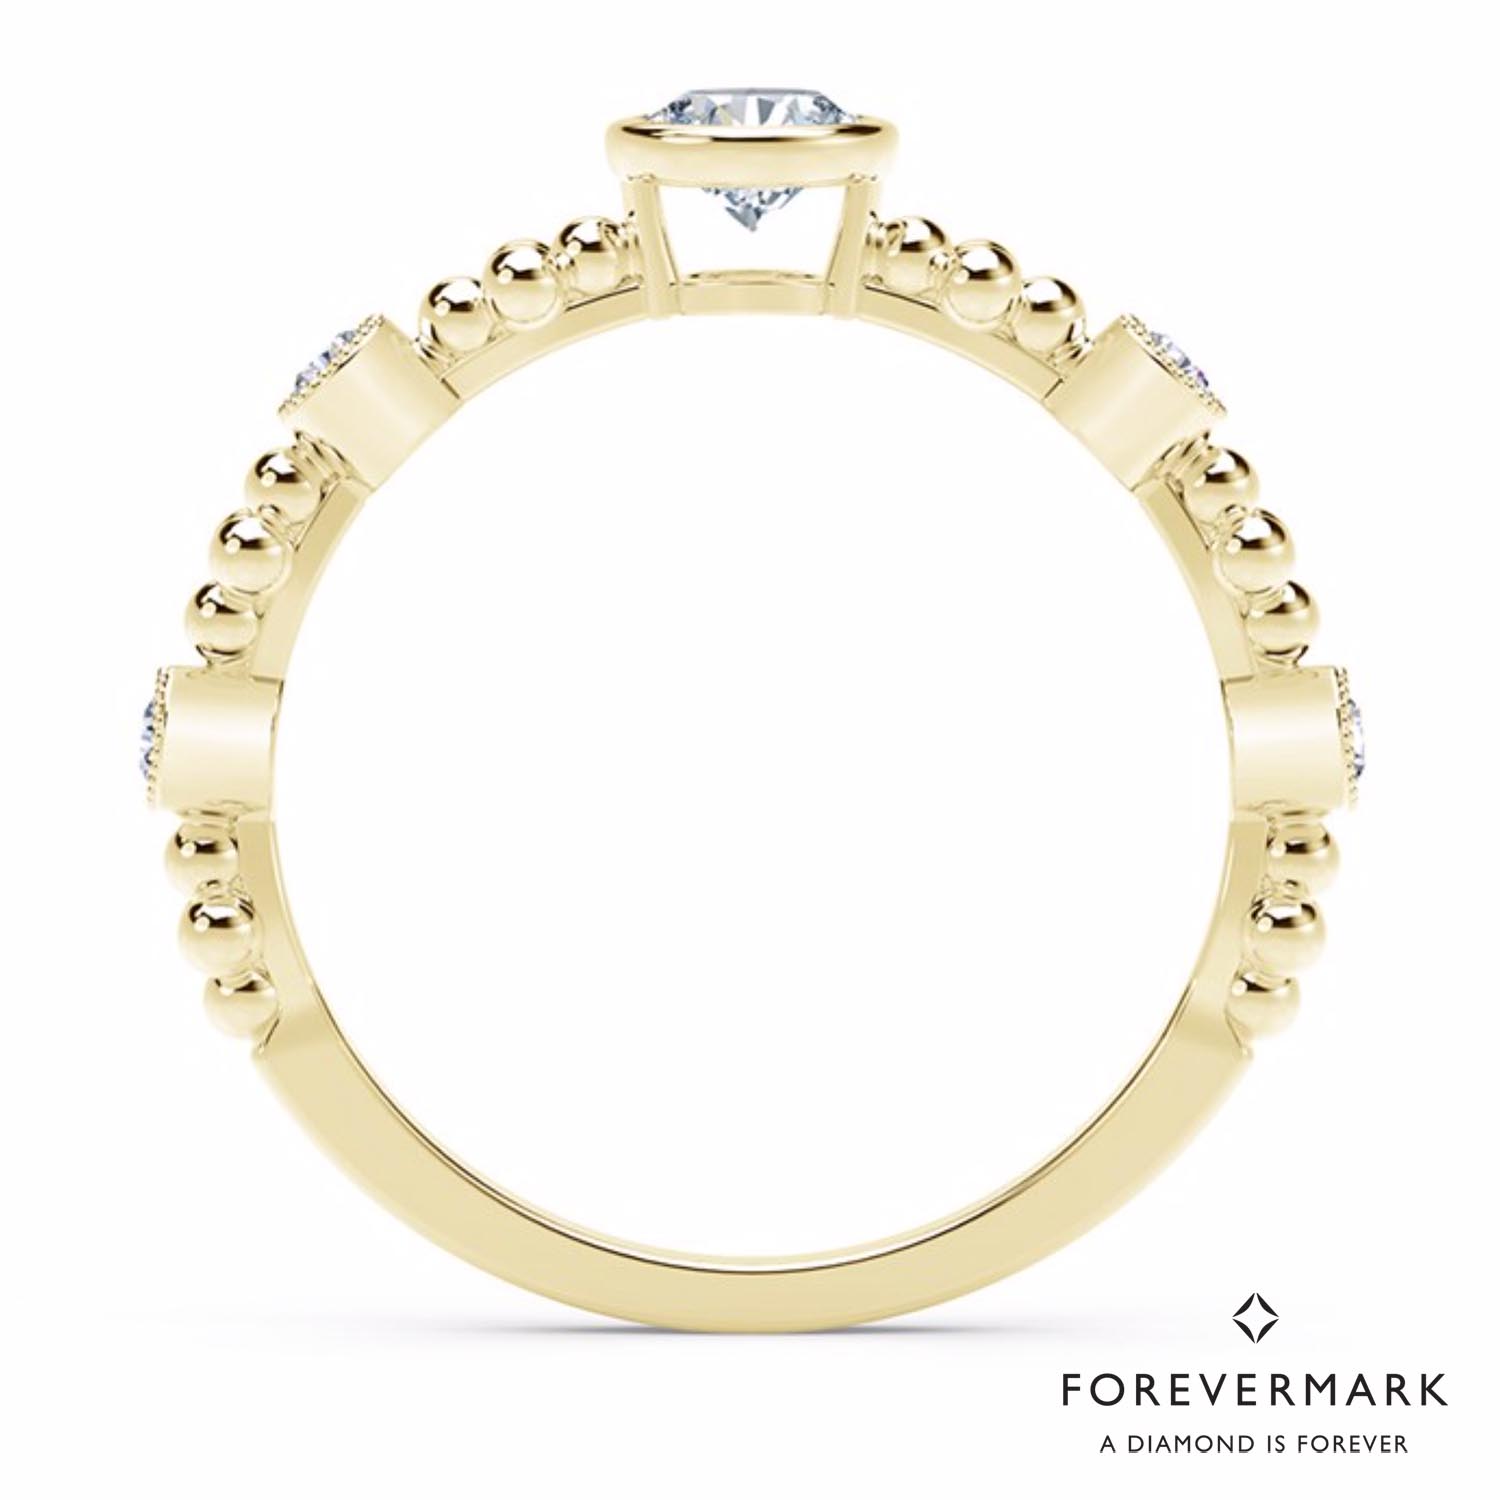 De Beers Forevermark Tribute Collection Feminine Diamond Ring in 18kt Yellow Gold (1/7ct tw)